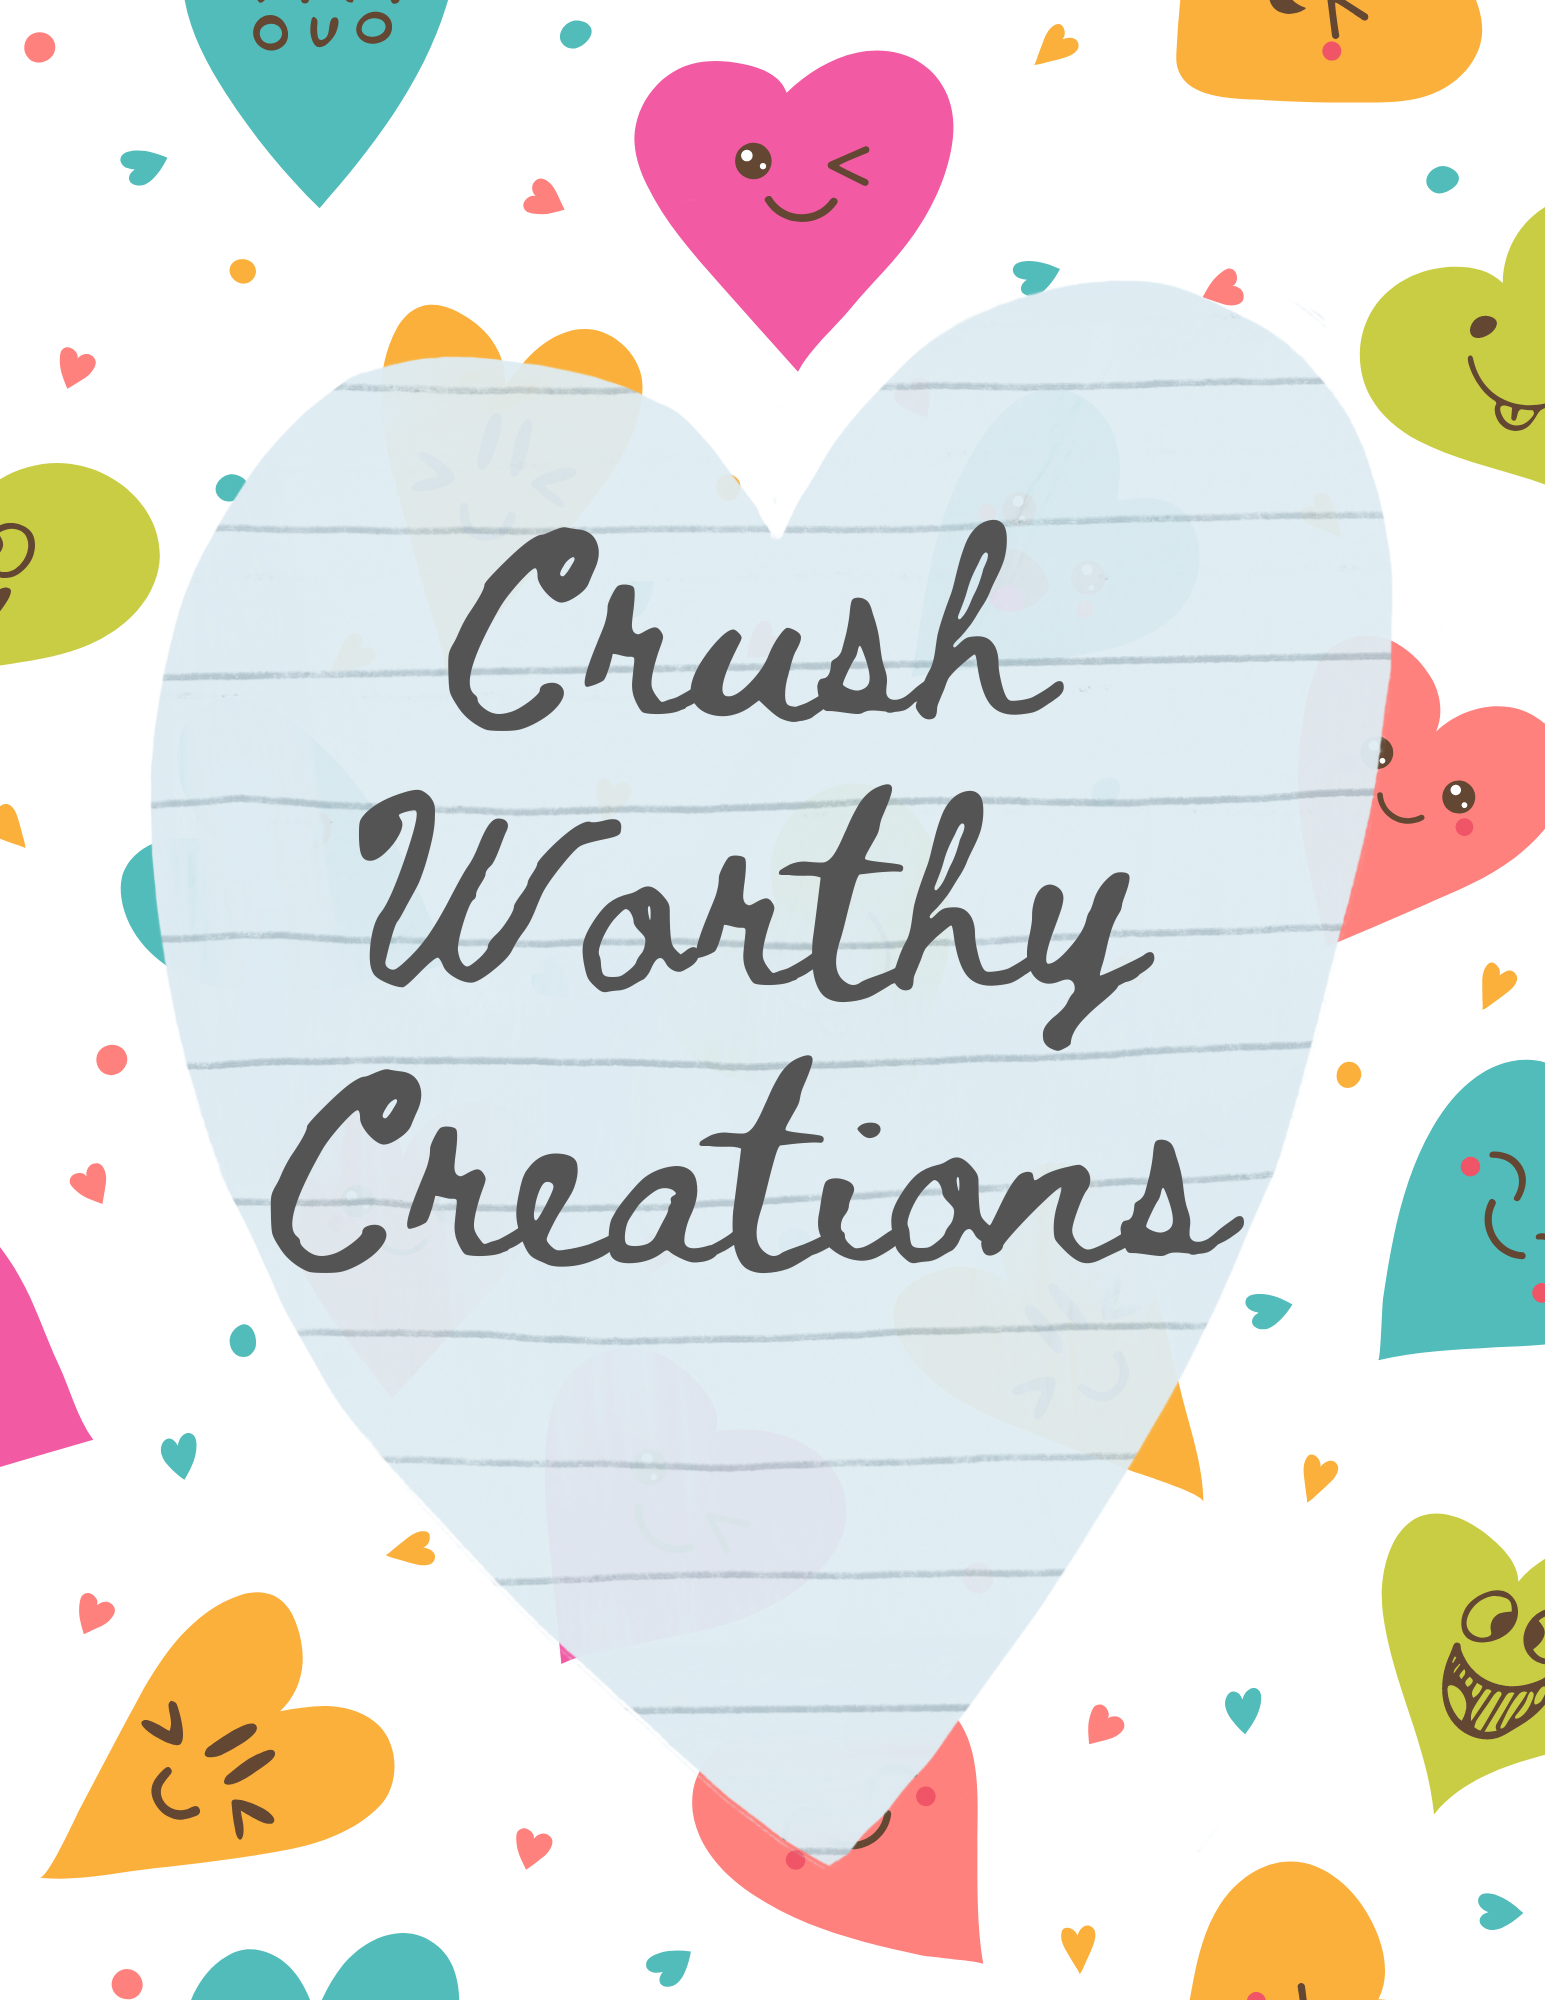 "Crush Worth Creations" inside a lined paper heart with colorful hearts in background